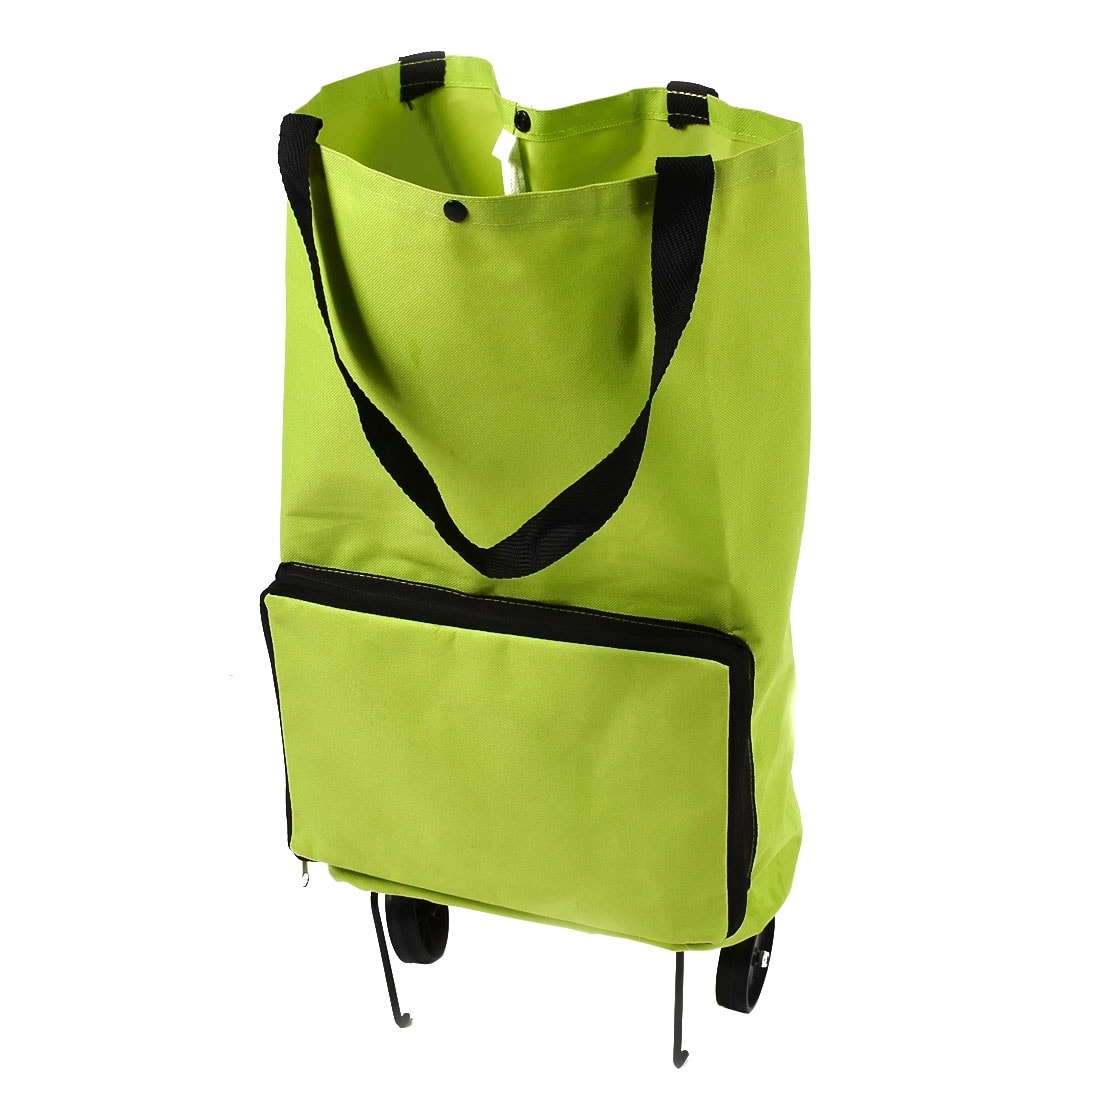 Foldable Shopping Trolley Bag with Wheels Collapsible Shopping